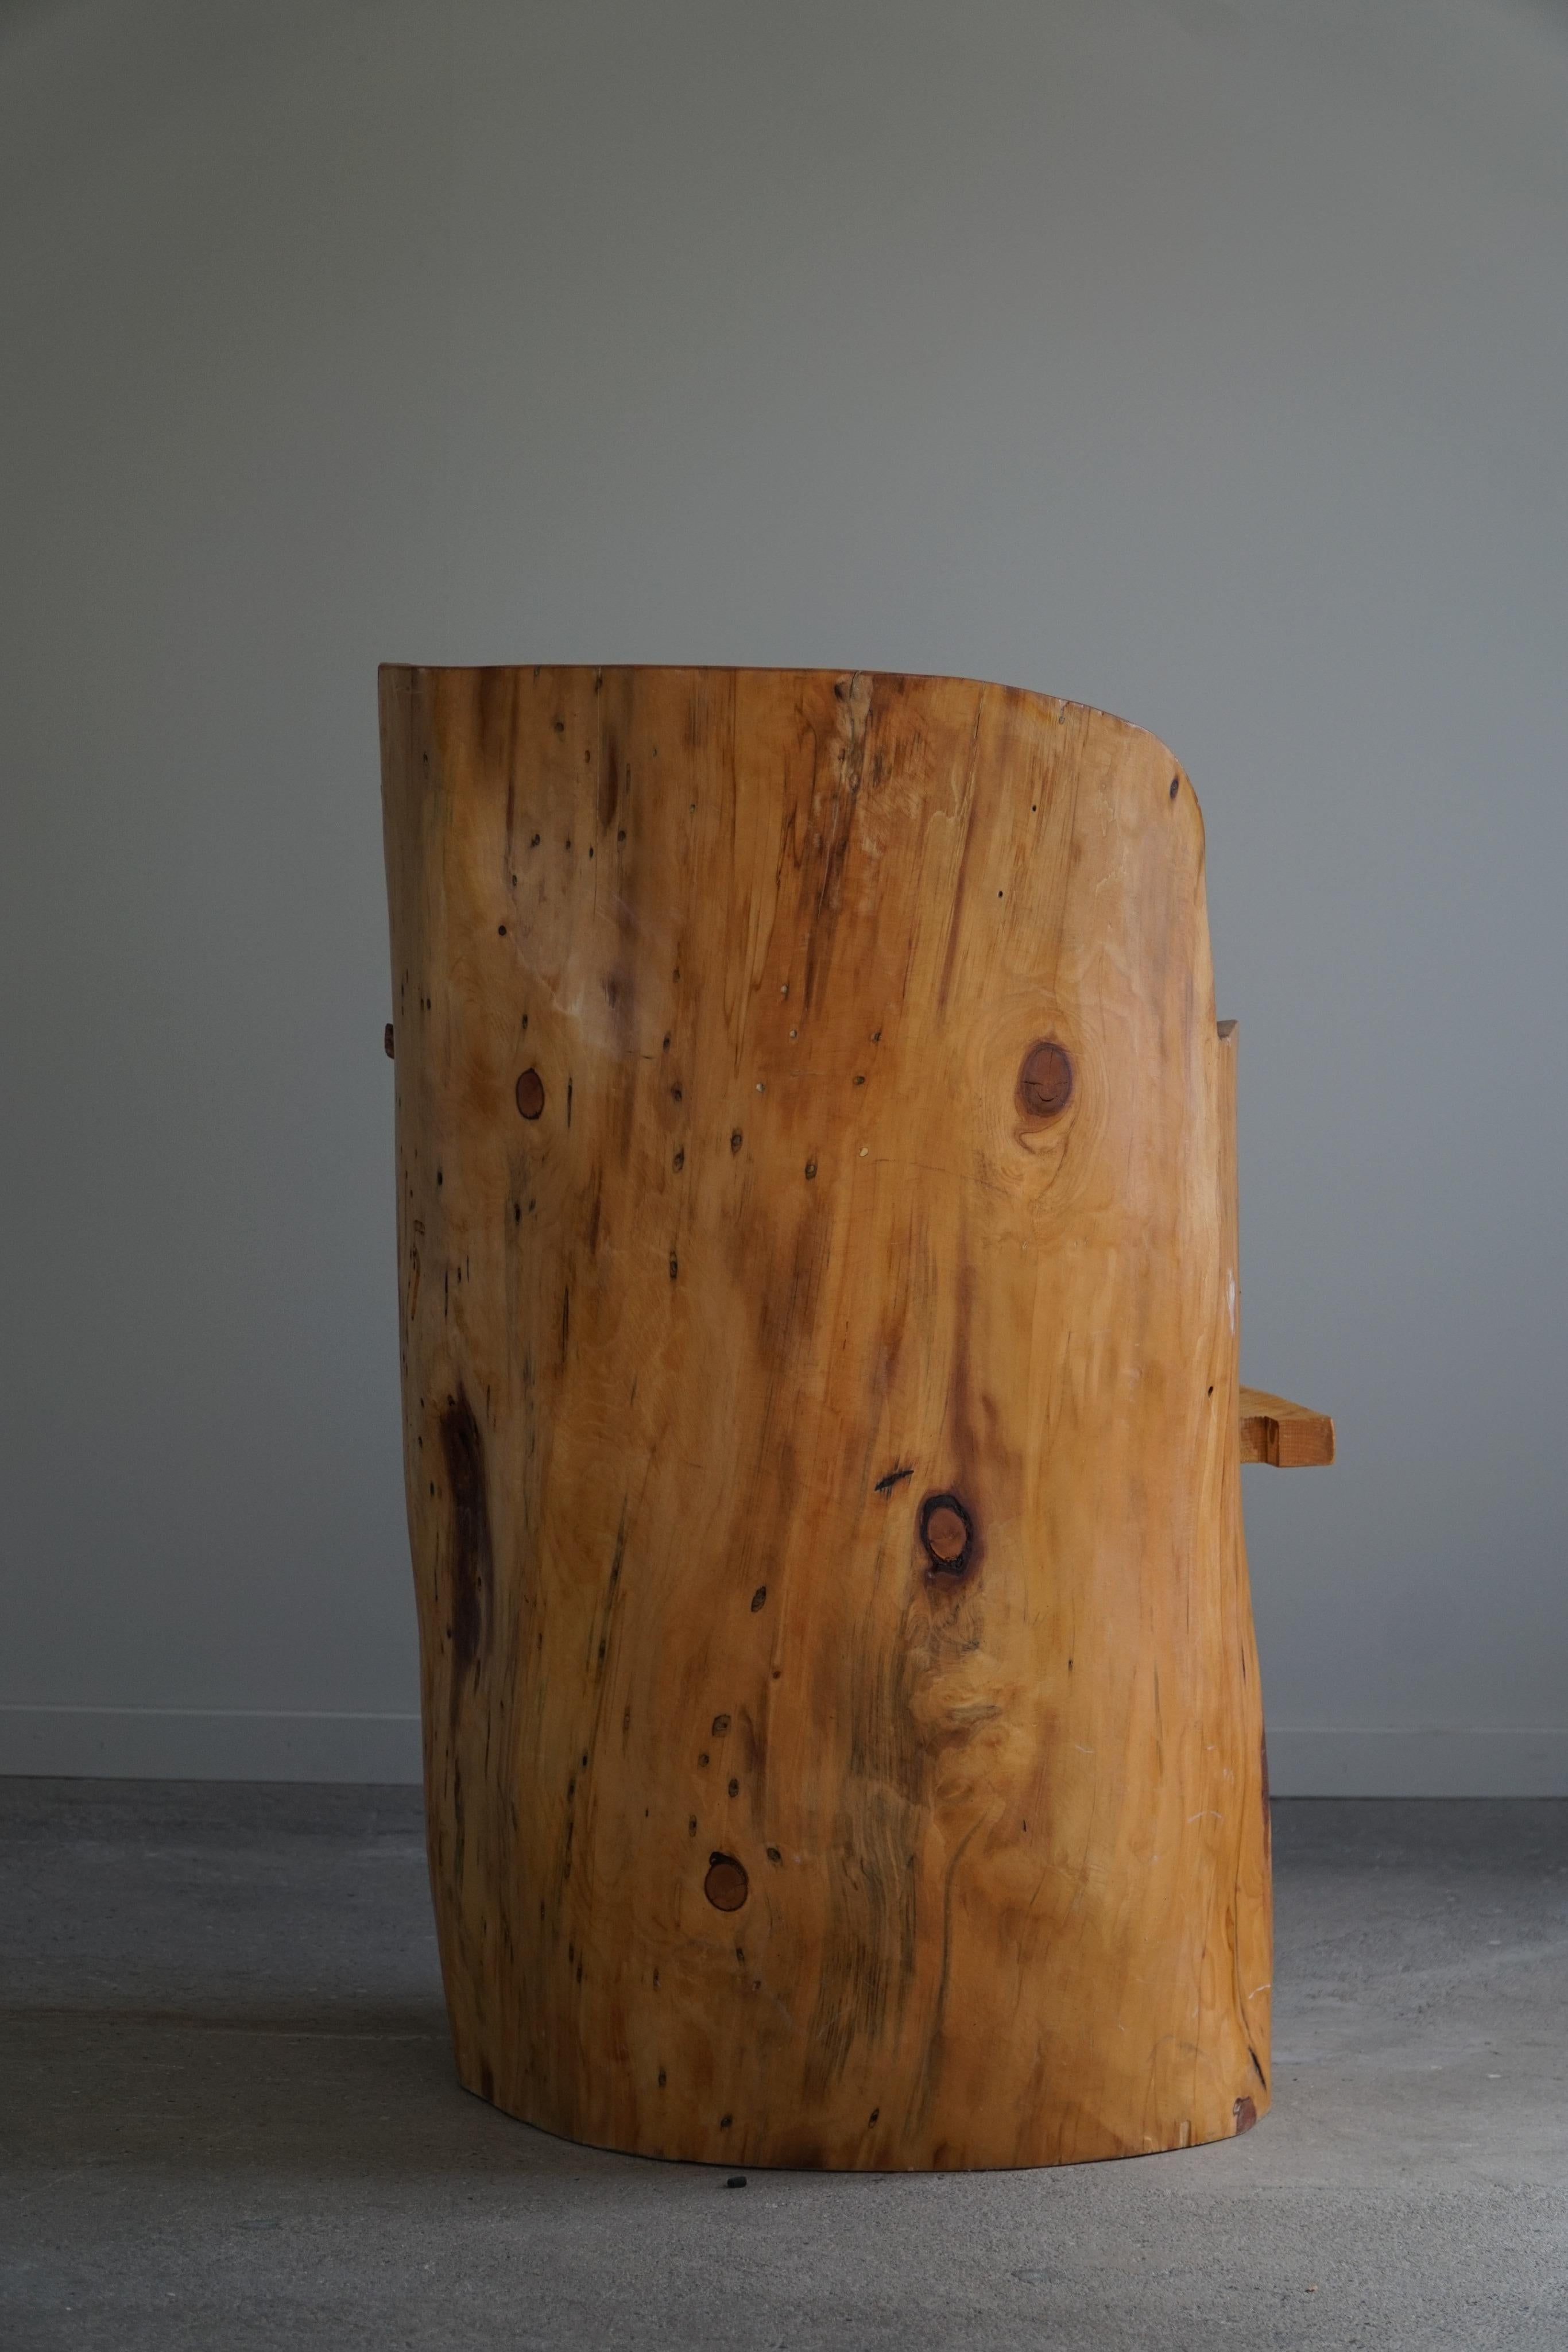 Stump Chair in Solid Birch by a Swedish Cabinetmaker, Wabi Sabi, 1950s For Sale 6